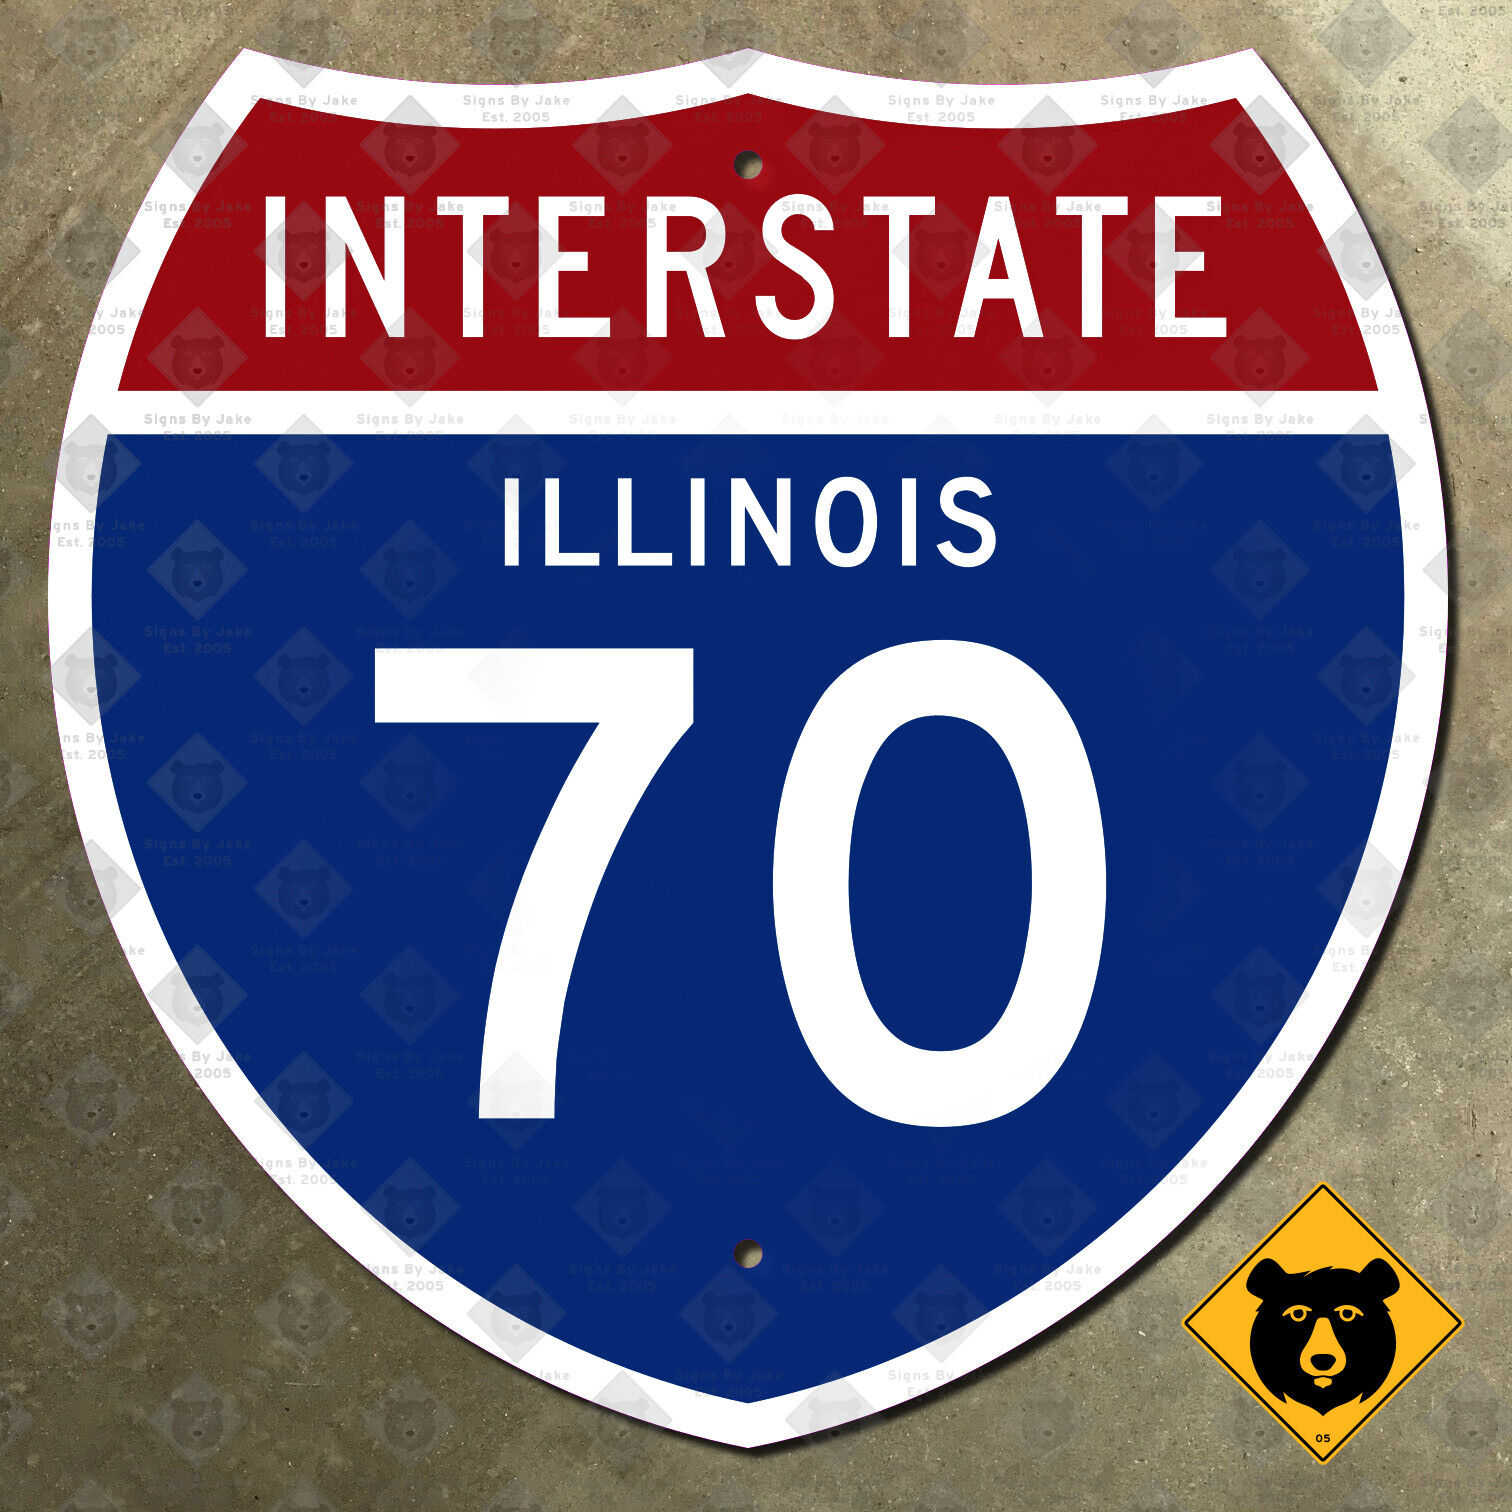 Illinois Interstate 70 route marker road sign Collinsville East St Louis 18x18